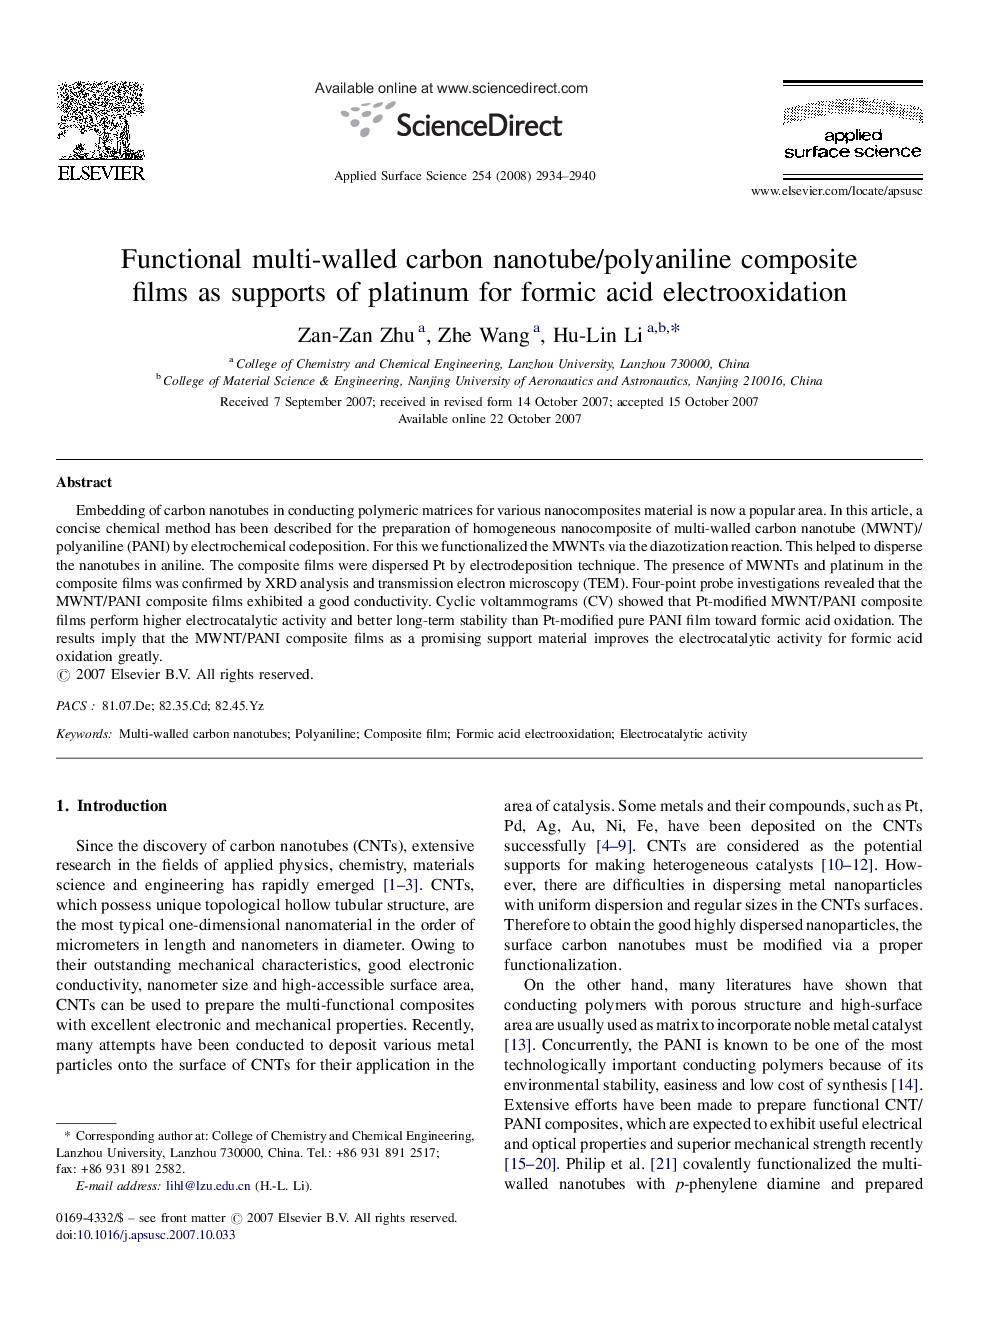 Functional multi-walled carbon nanotube/polyaniline composite films as supports of platinum for formic acid electrooxidation